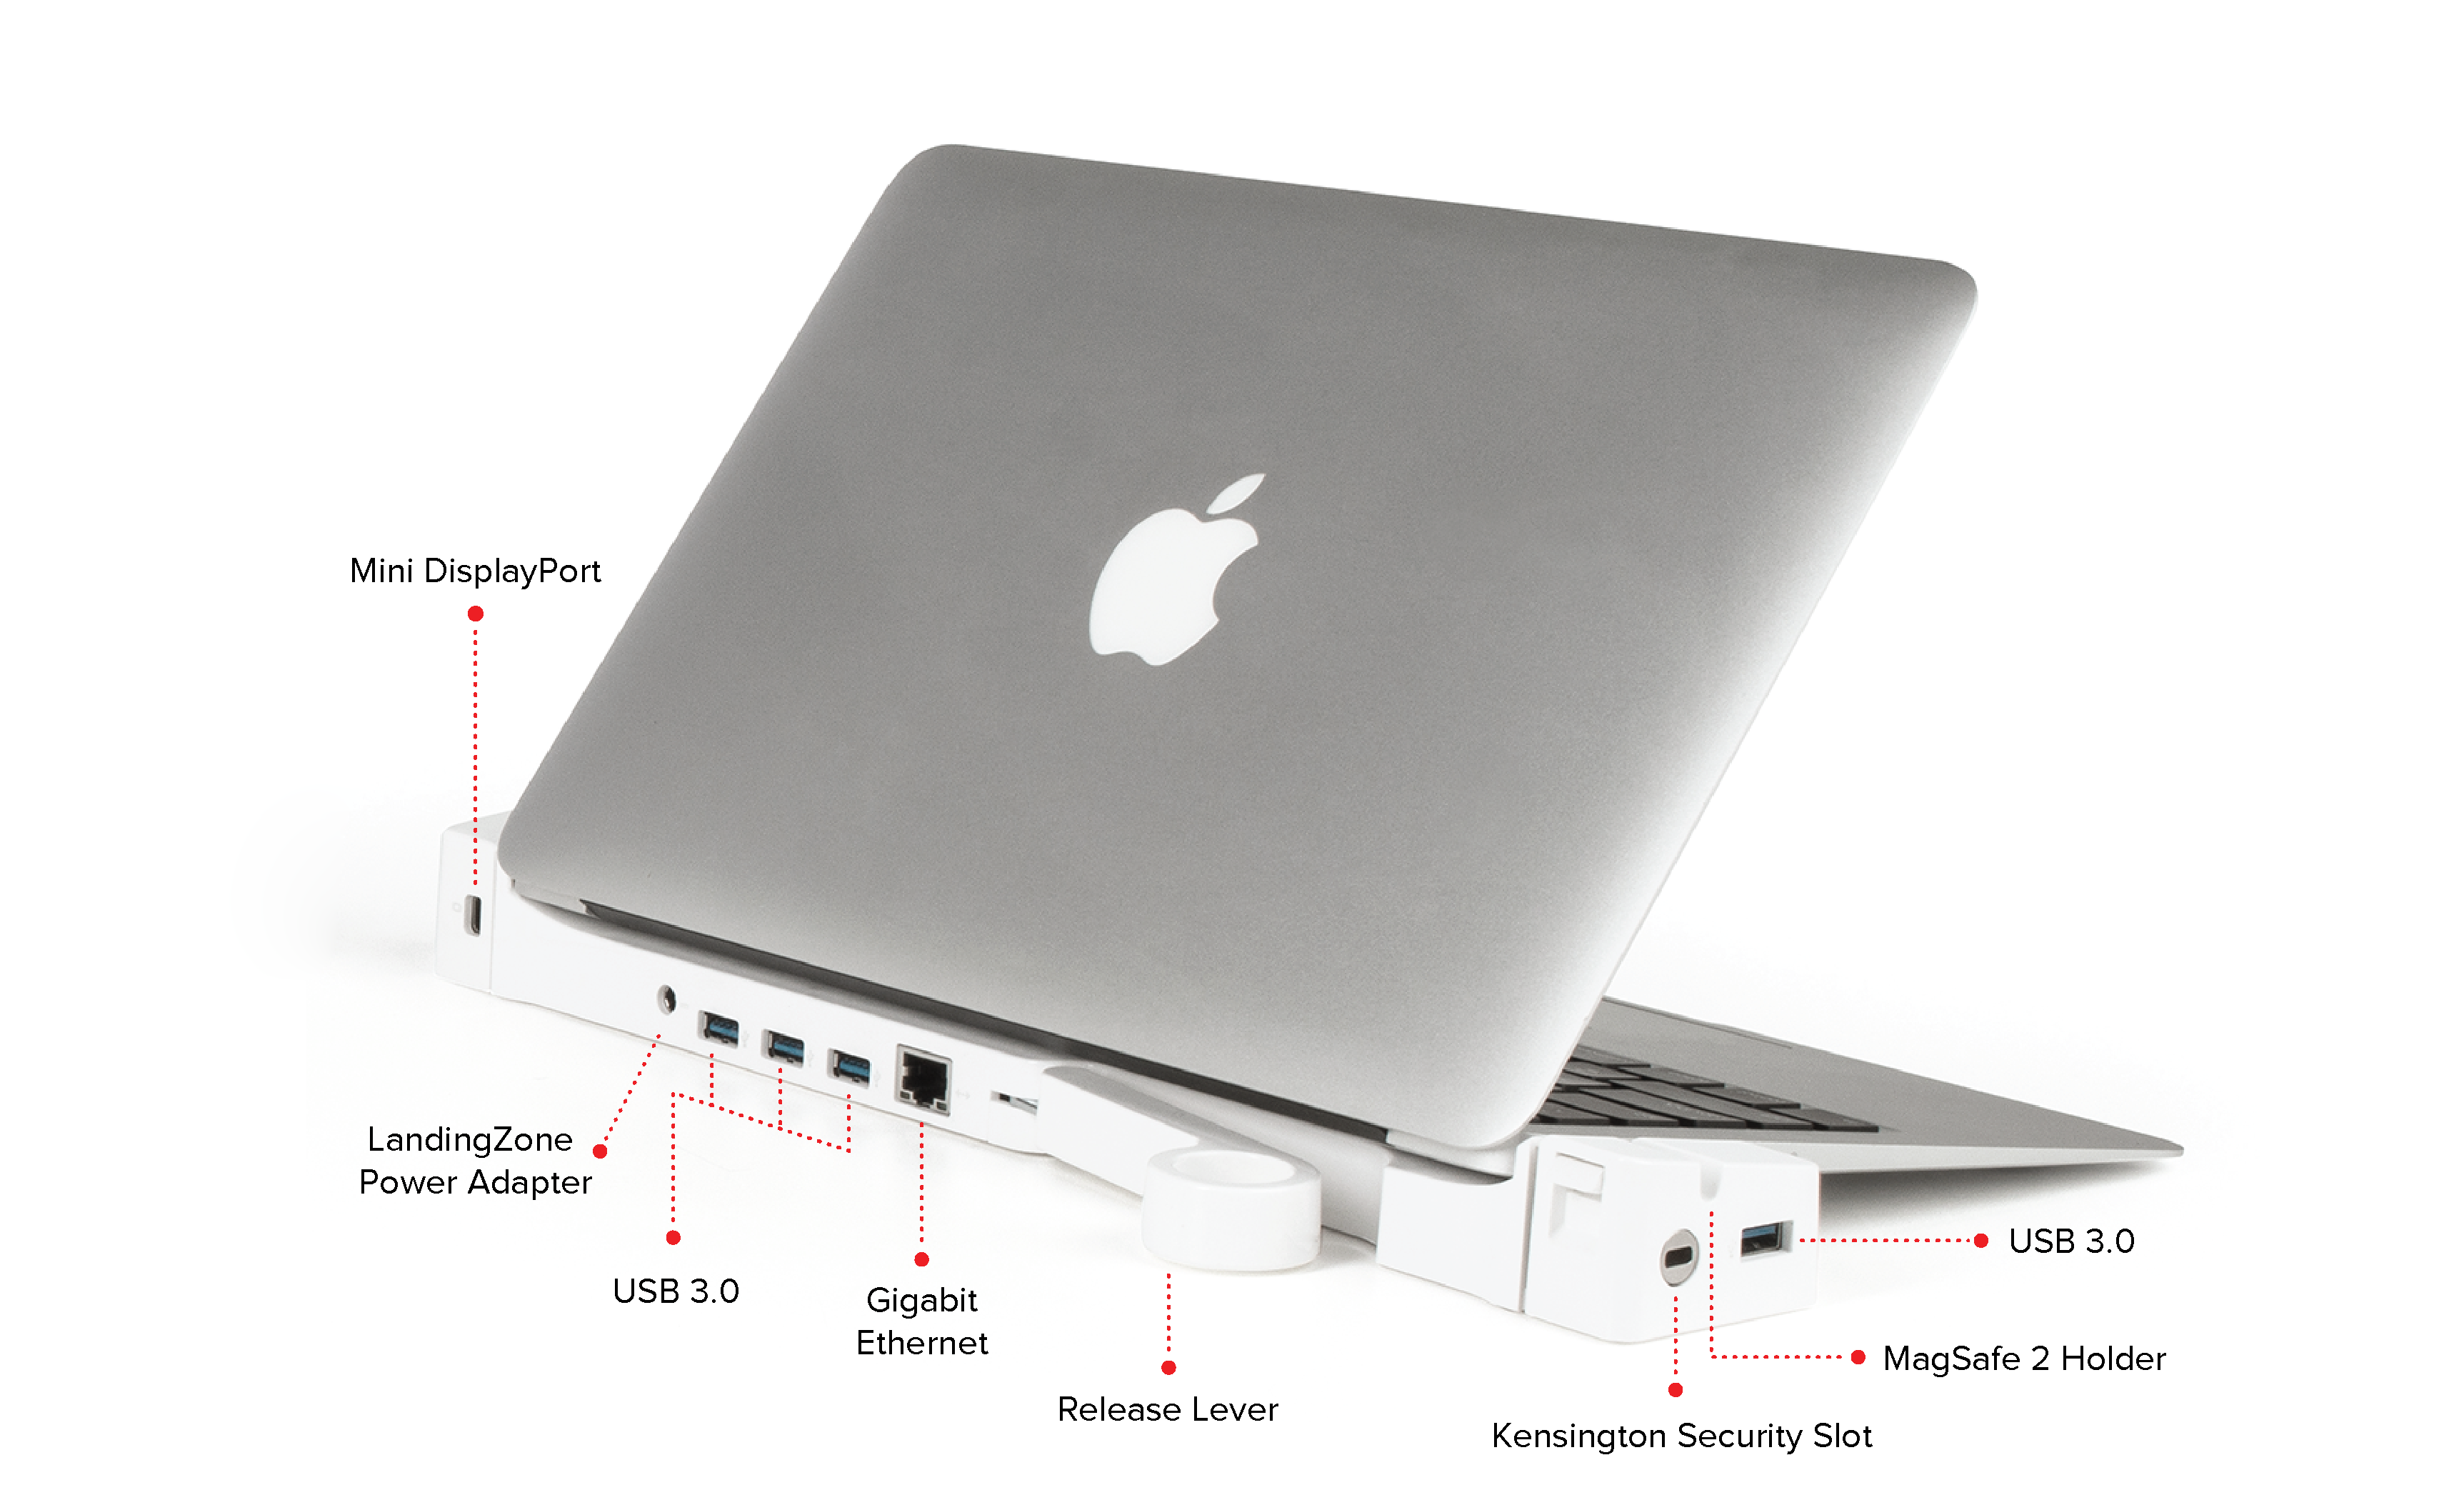 power suply for mac air 2012